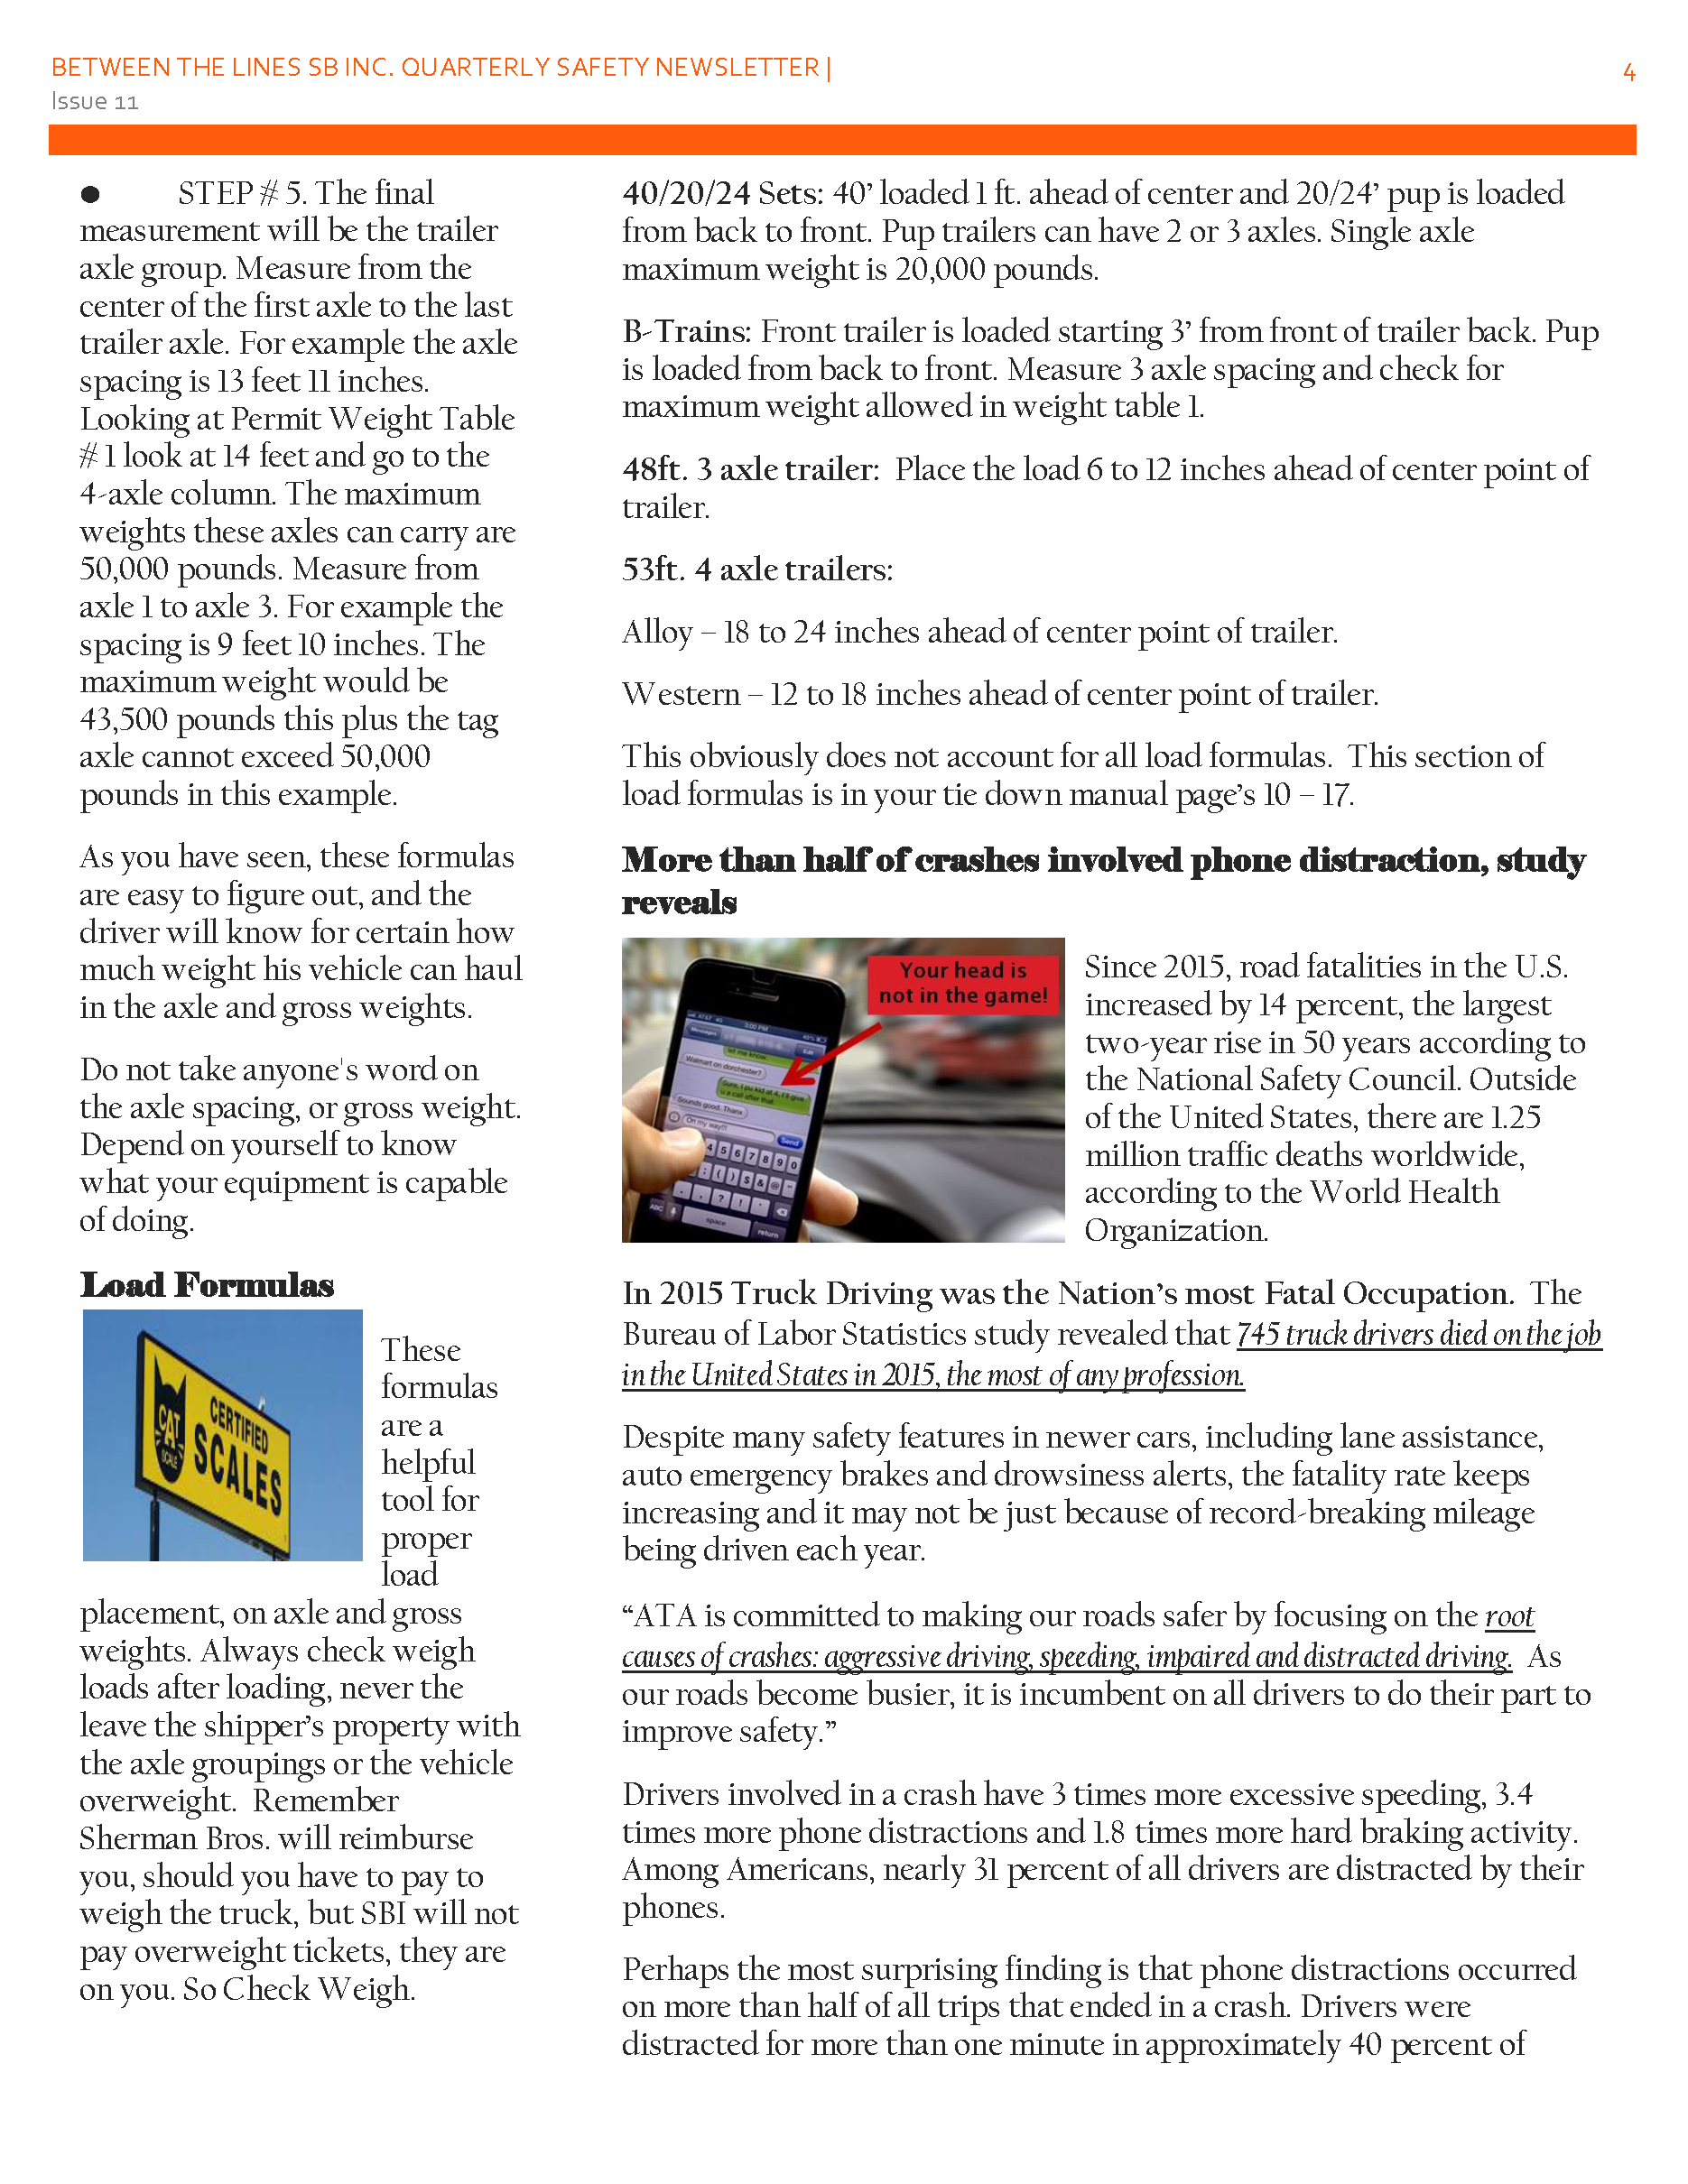 APRIL SAFETY LETTER_Page_4.png